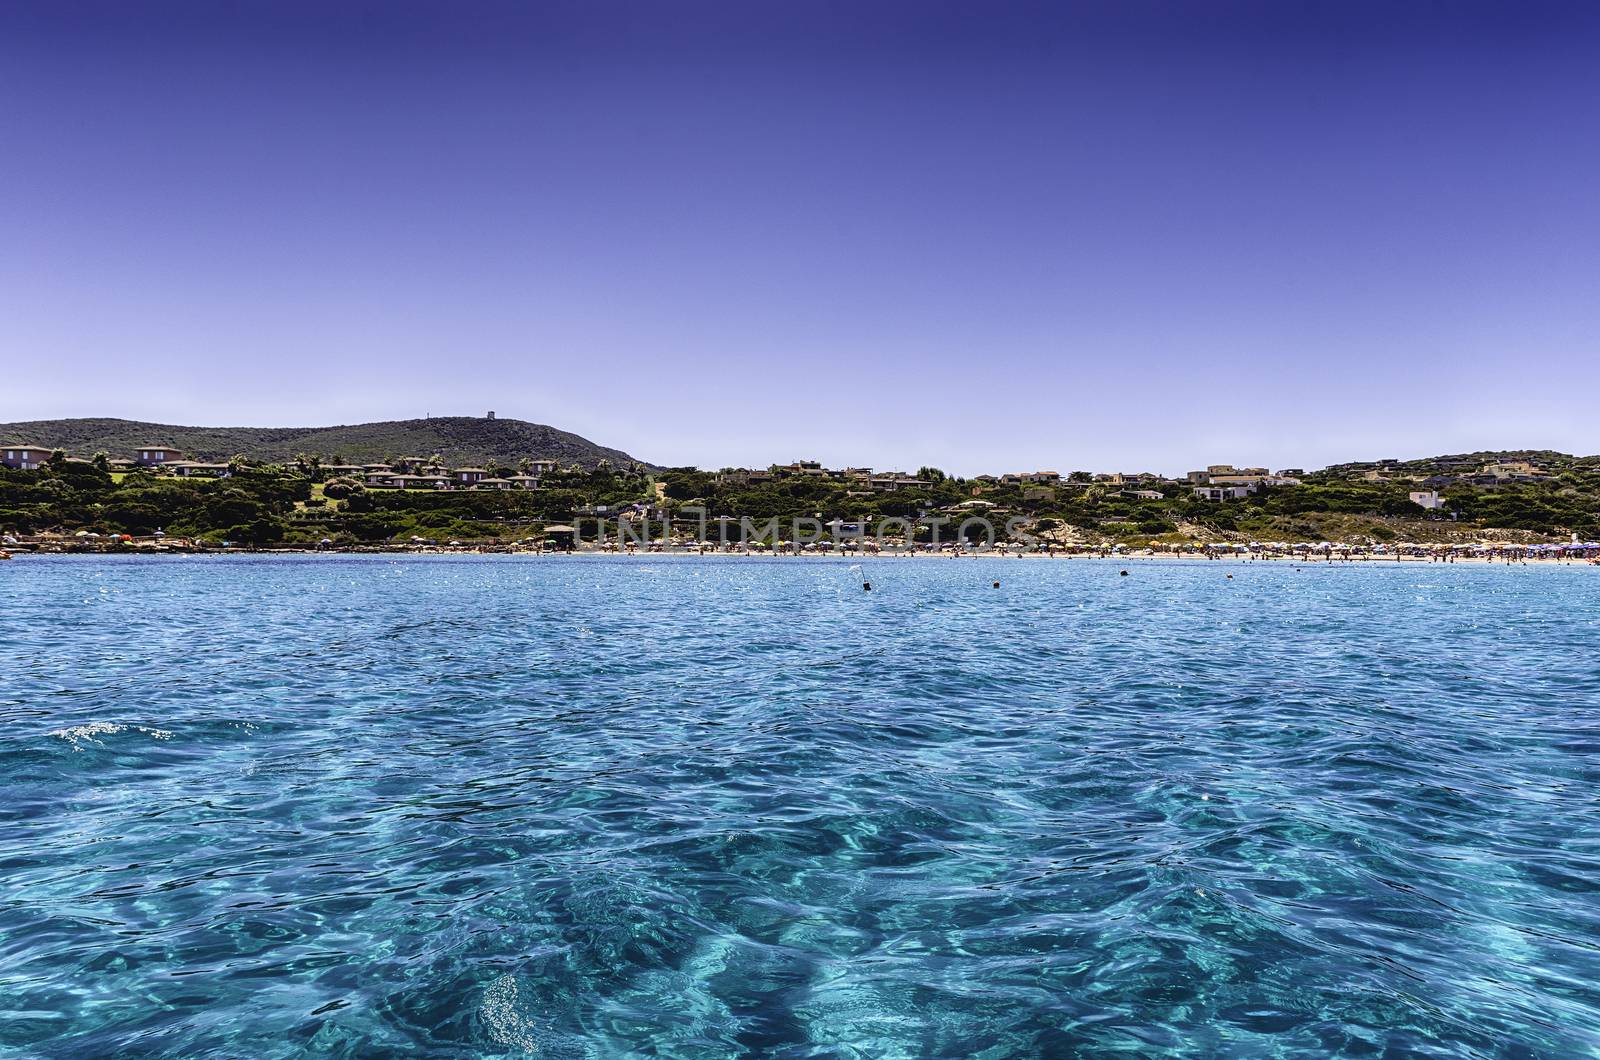 Scenic view of La Pelosa beach, one of the most beautiful seaside places of the Mediterranean, located in the town of Stintino, northern Sardinia, Italy